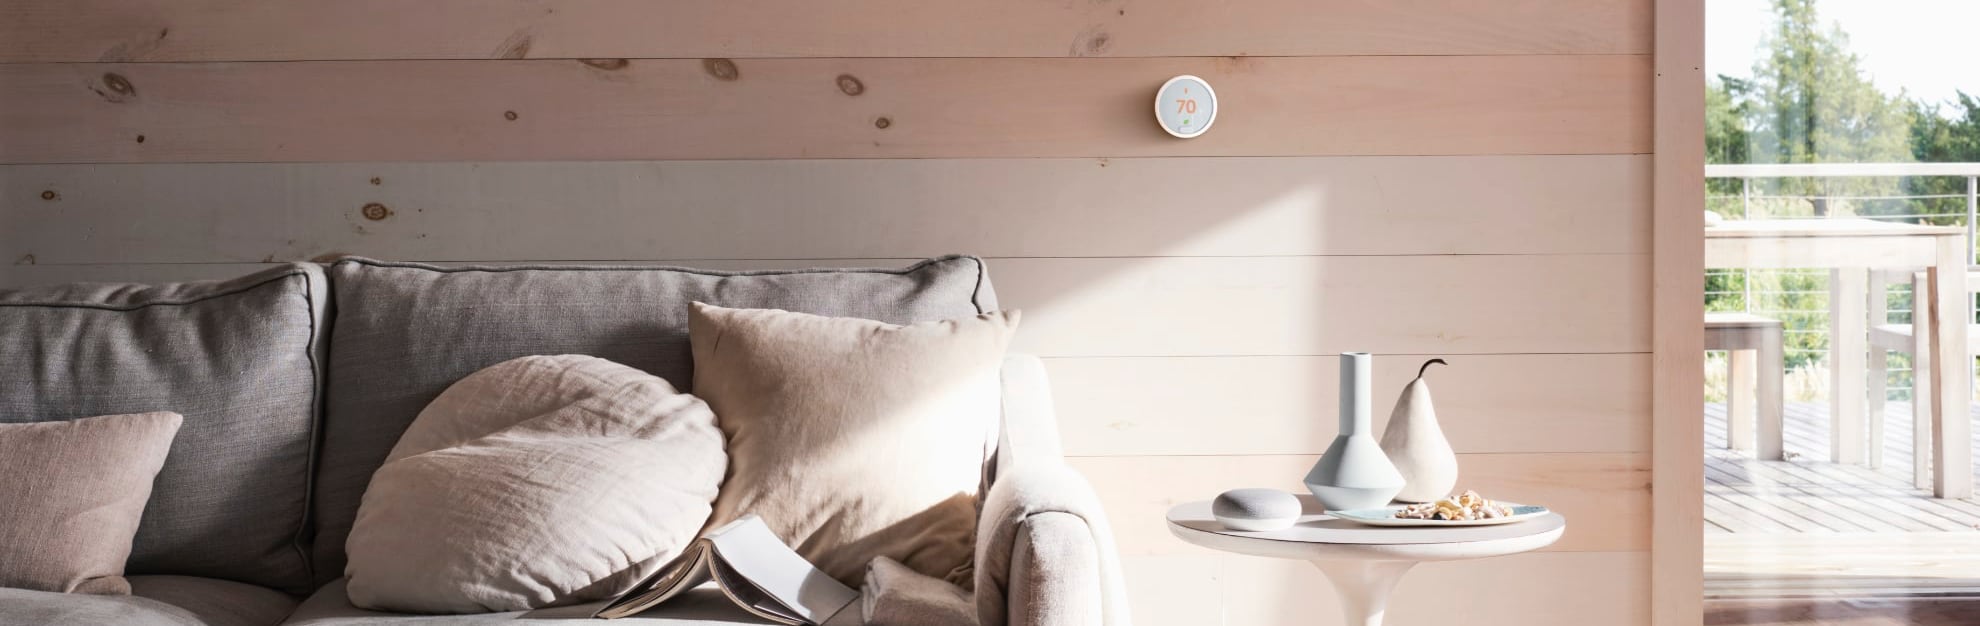 Vivint Home Automation in Lubbock